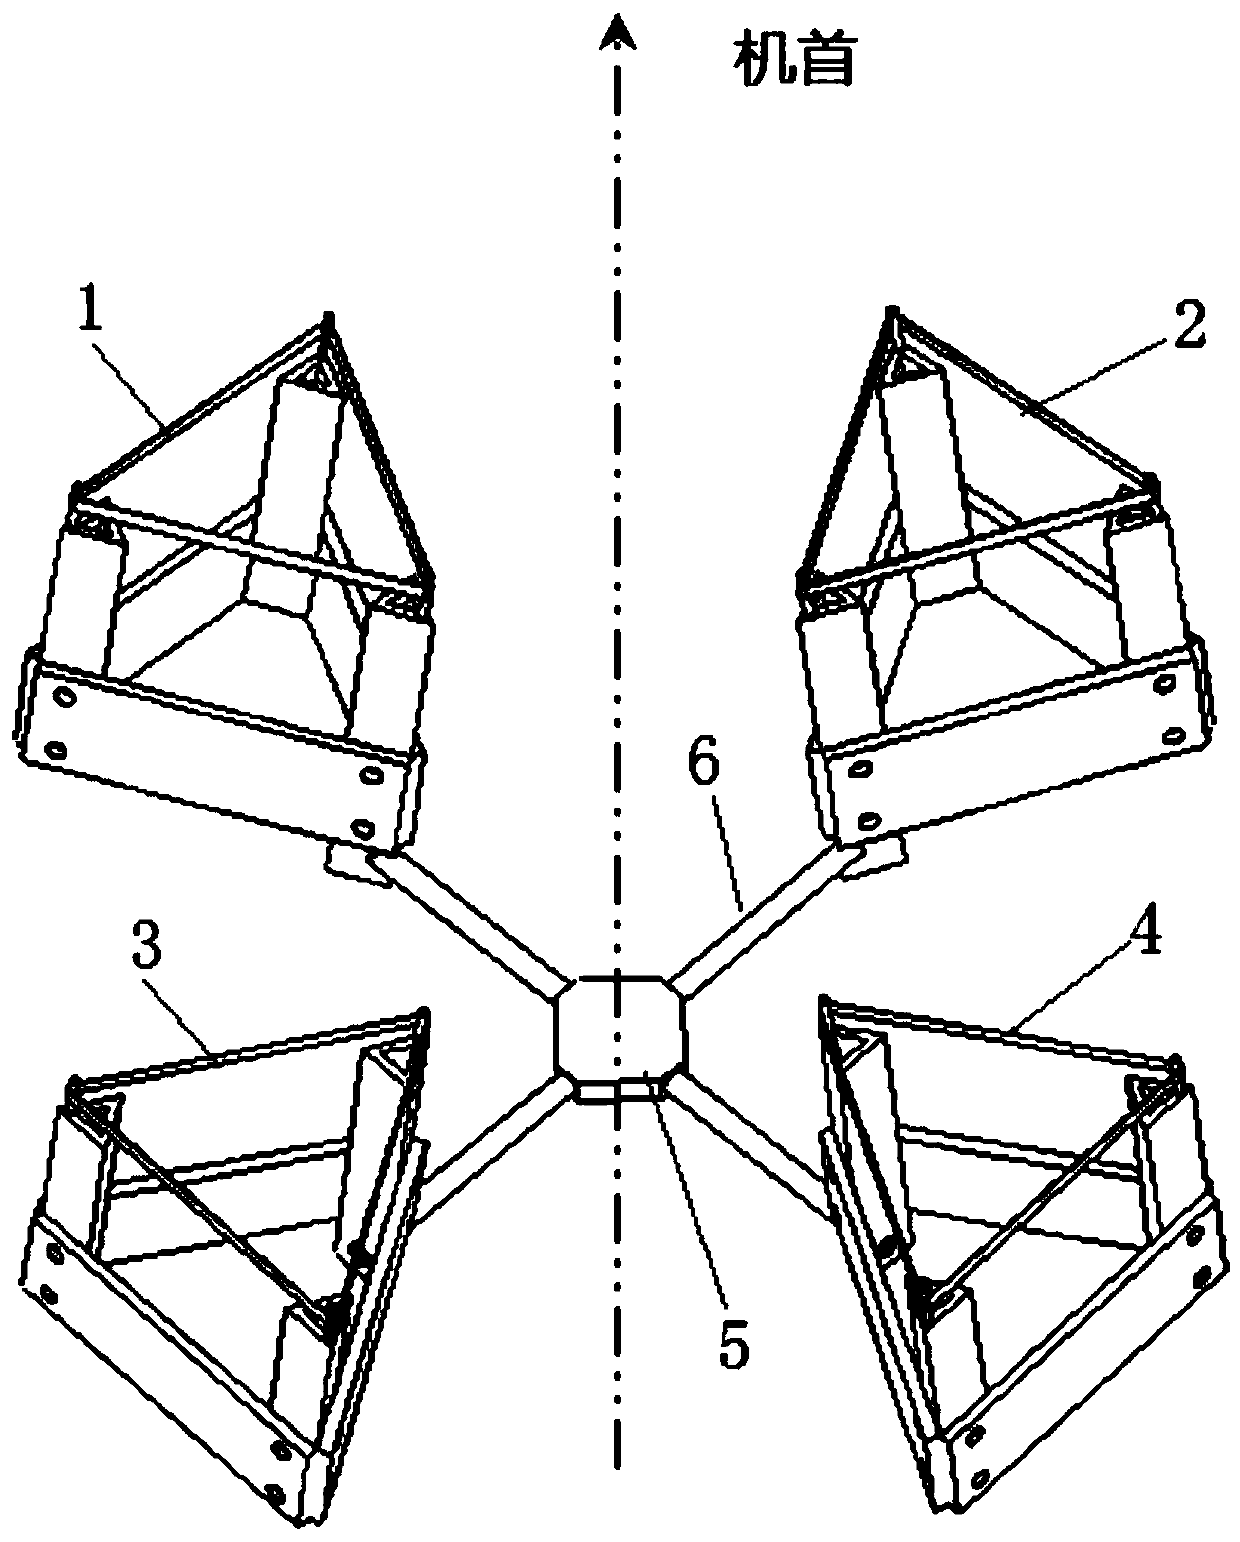 An ion wind solid state aircraft and a control method thereof